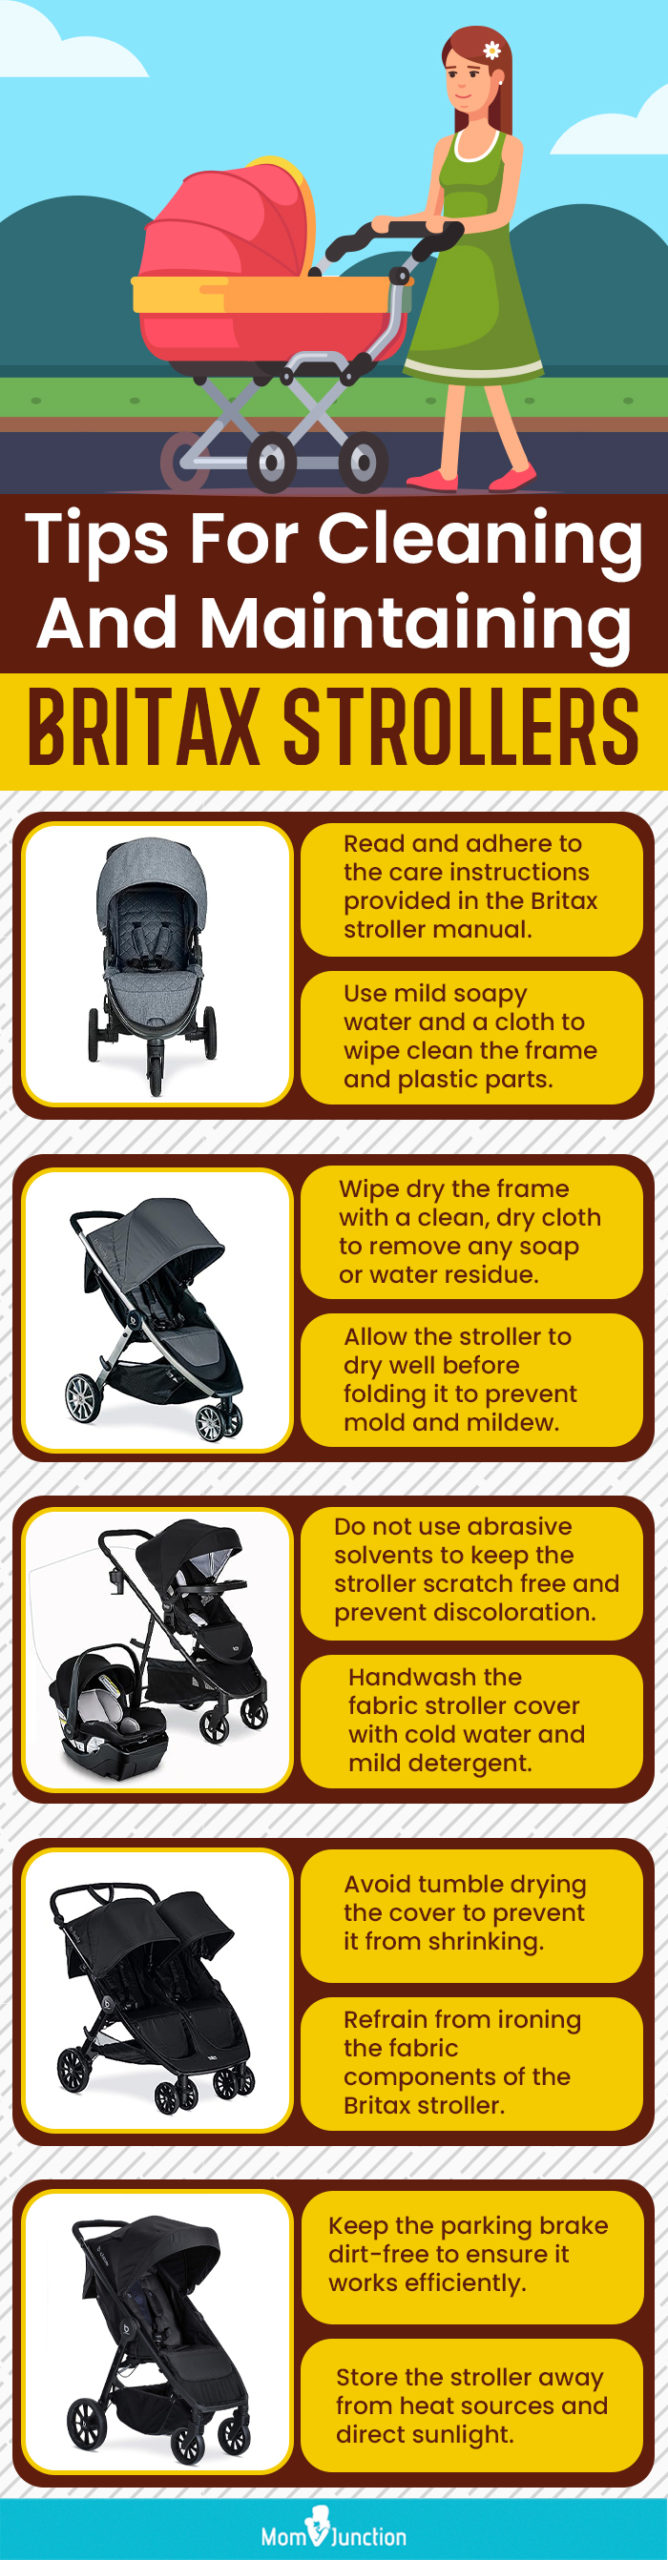 Tips For Cleaning And Maintaining Britax Strollers (infographic)